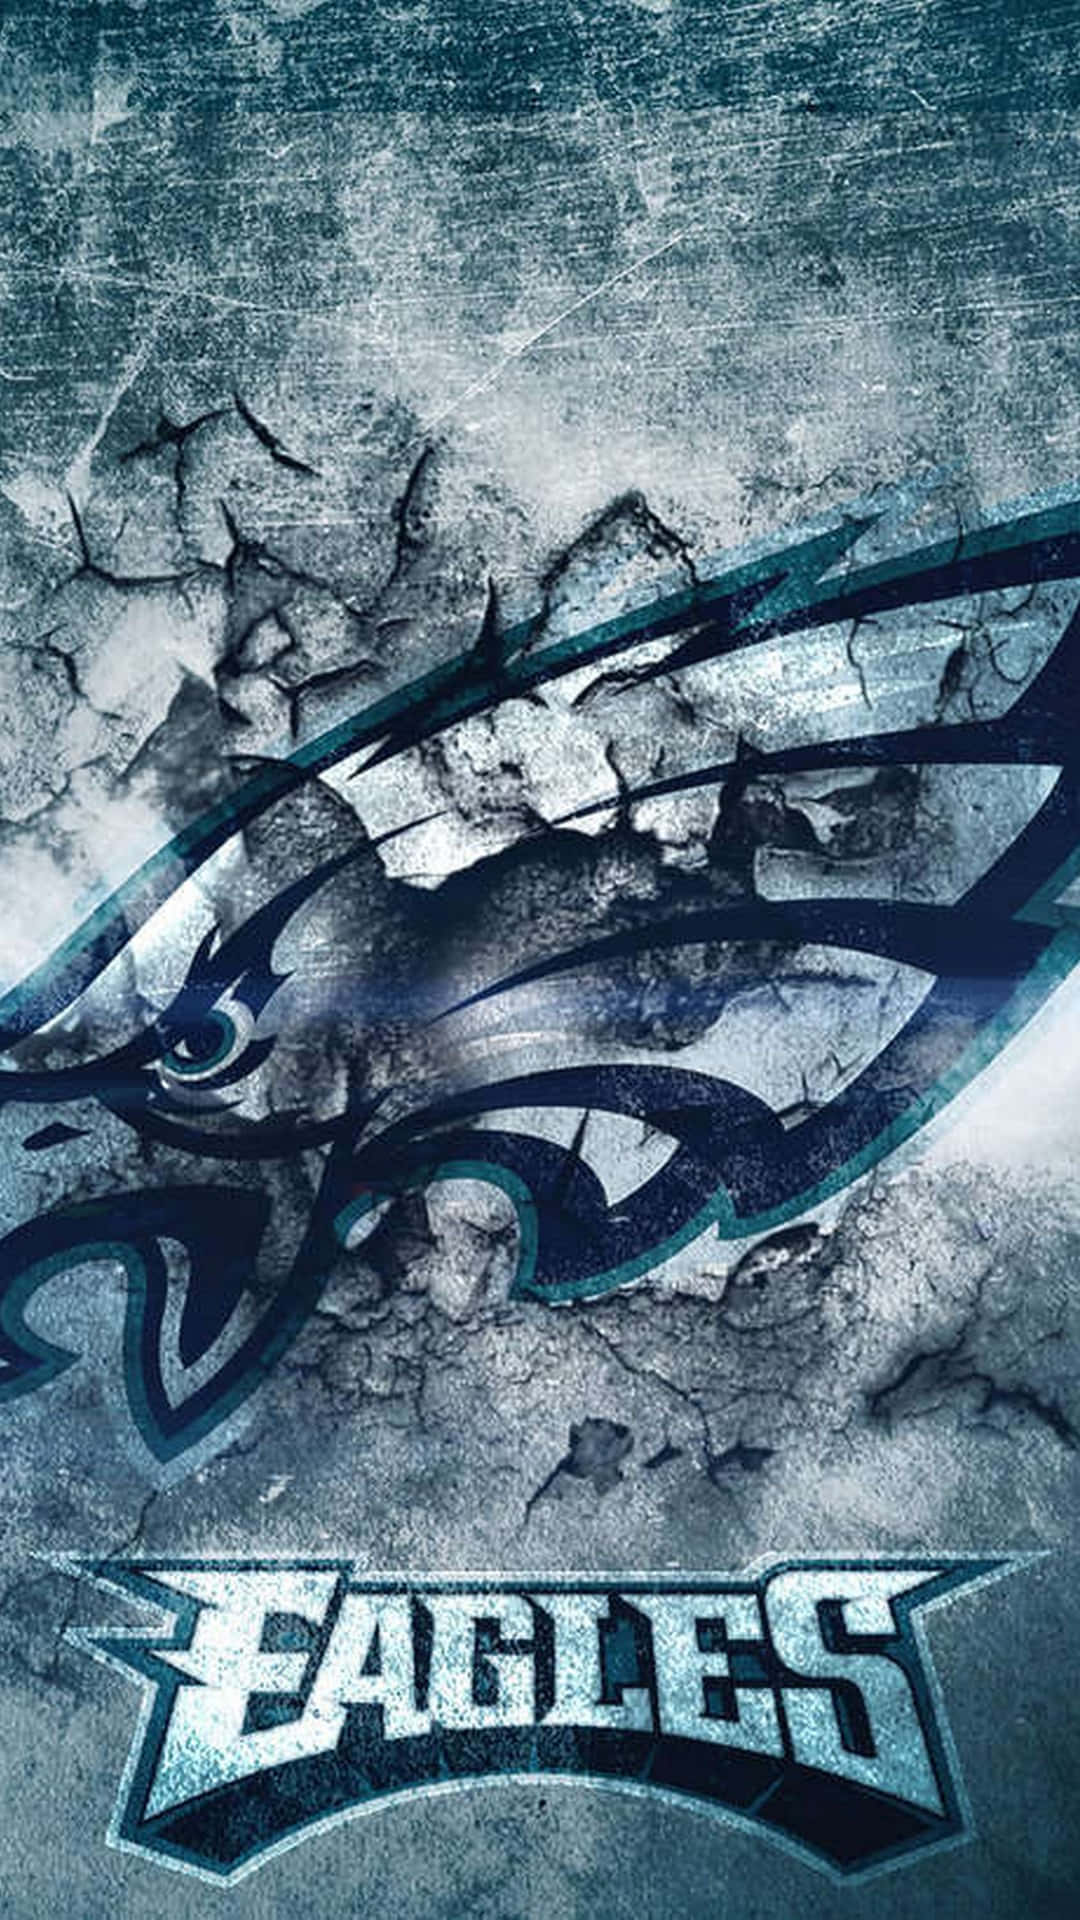 Eagles Football On Cracked Wall Wallpaper